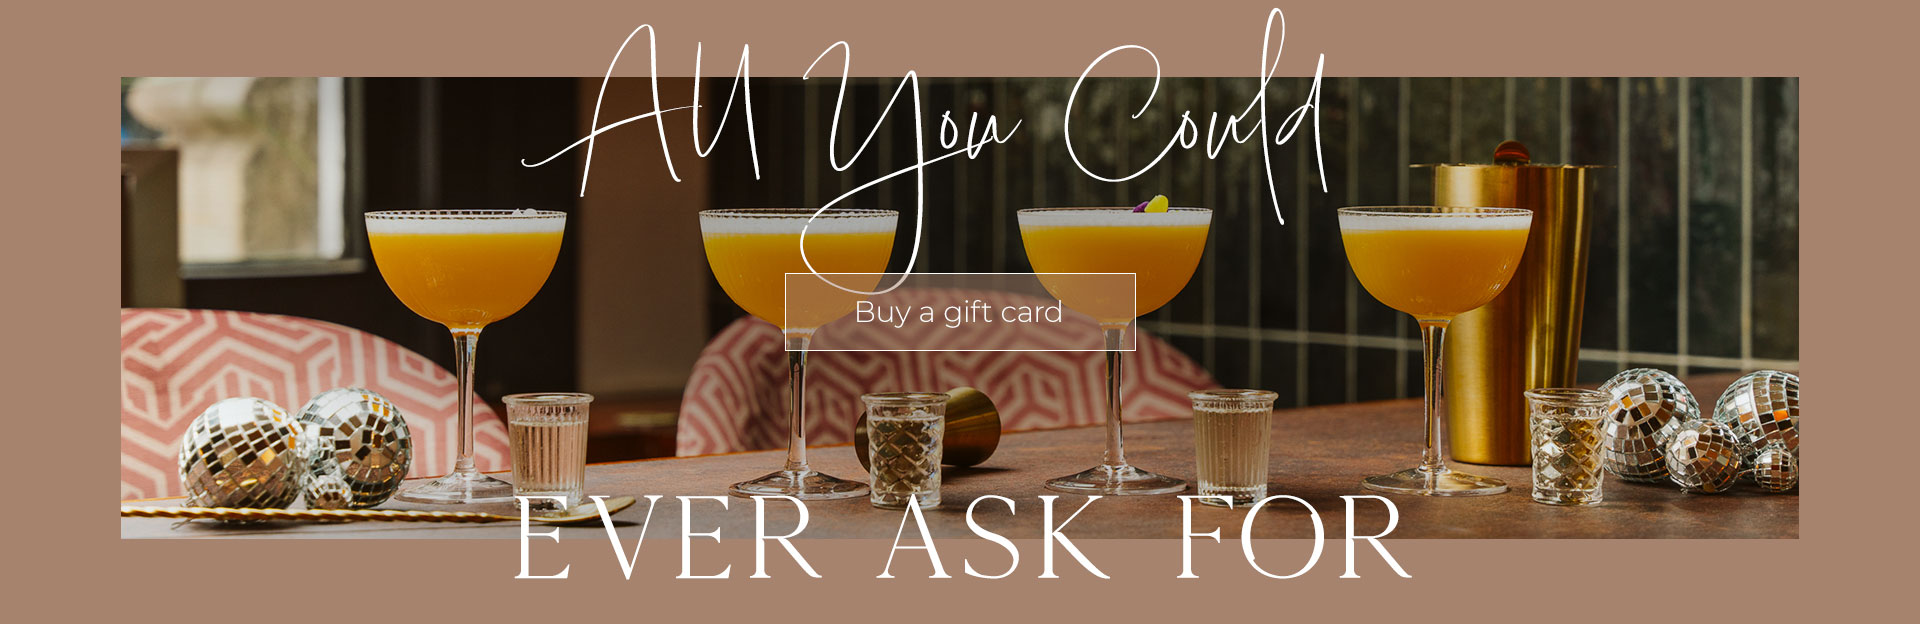 All Bar One Gift Cards at All Bar One Chester